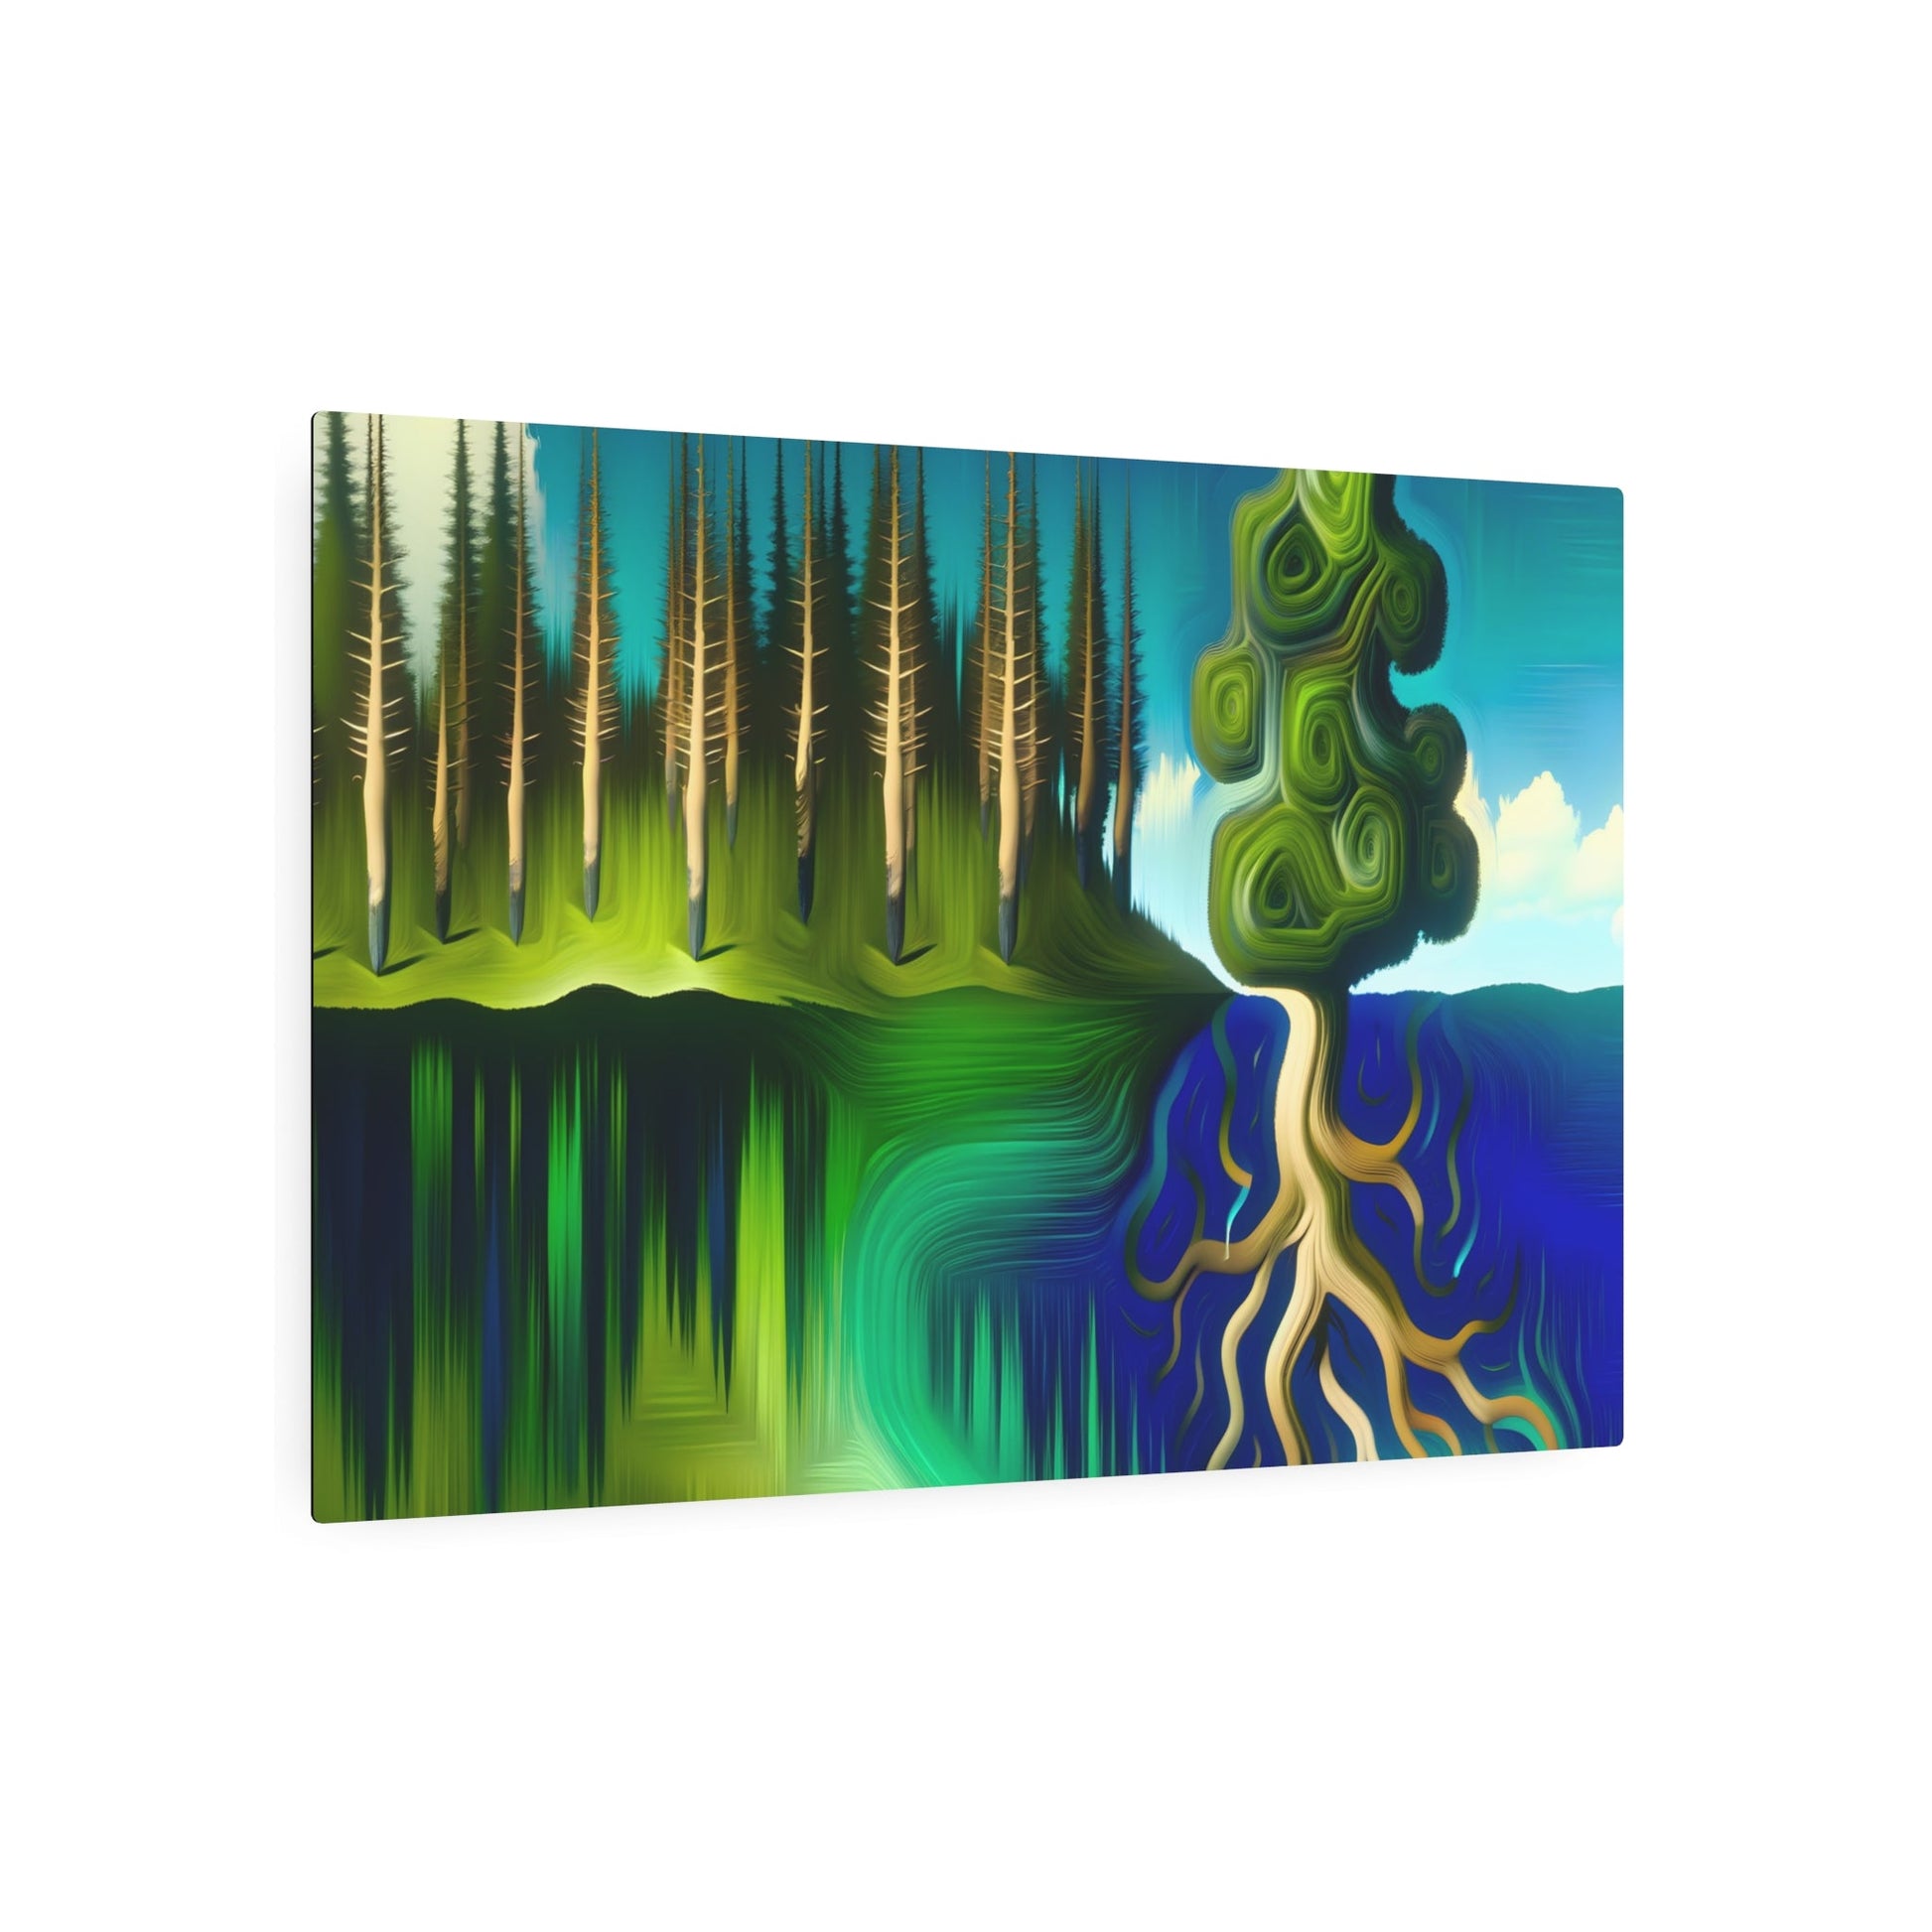 Metal Poster Art | "Modern Surrealism Art: Dream-Like Fusion of Skybound Trees & Underwater Forests - Contemporary Whimsical Wall Decor in Surreal - Metal Poster Art 36″ x 24″ (Horizontal) 0.12''